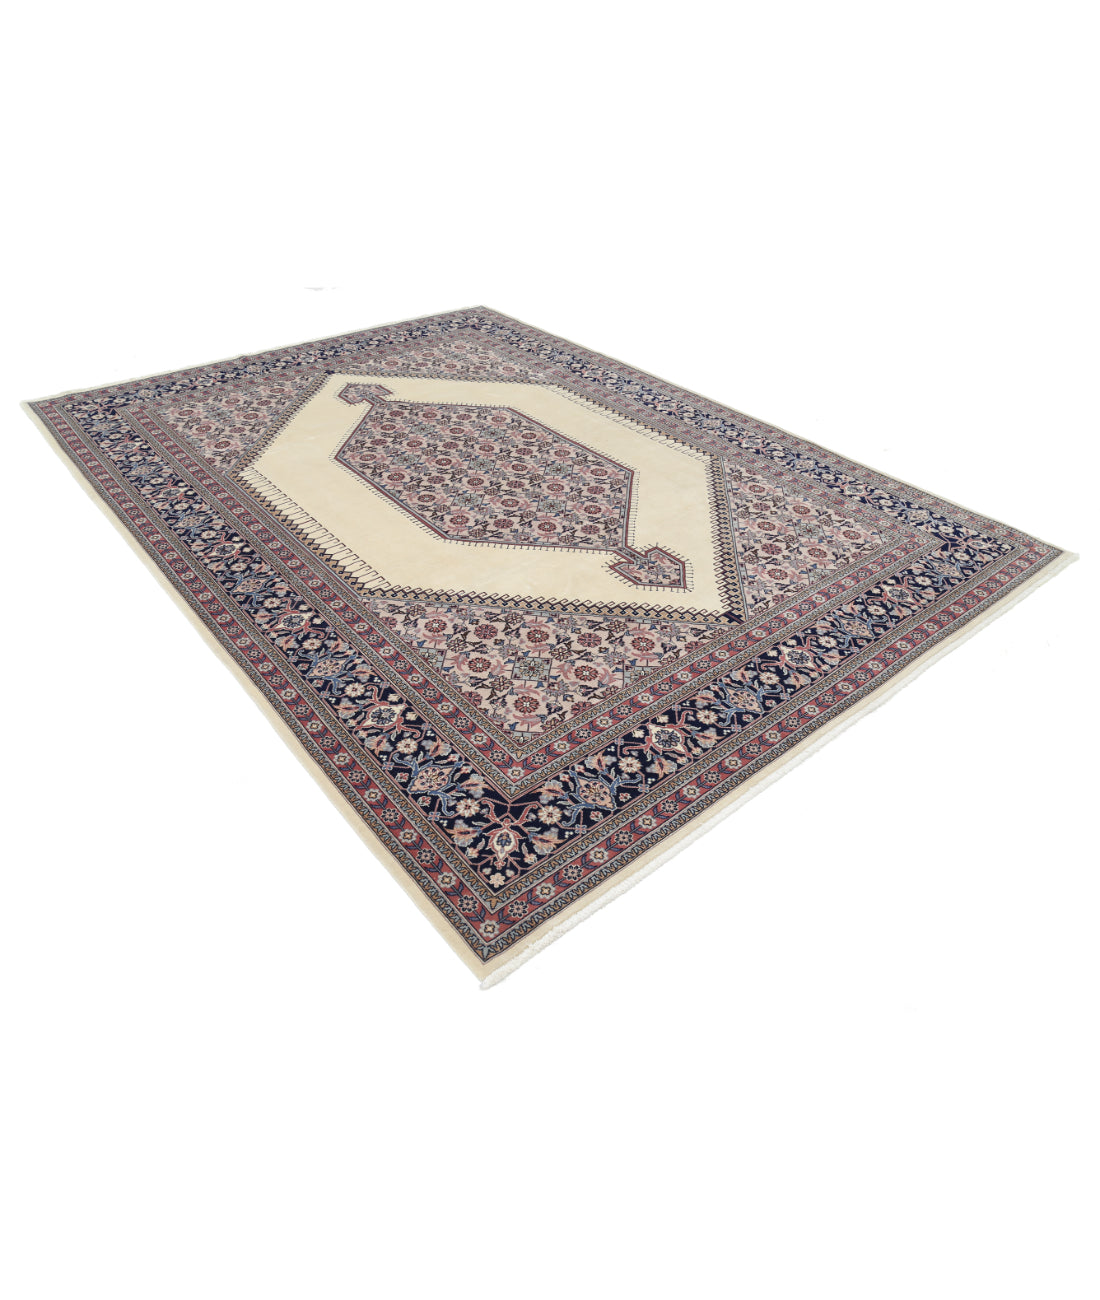 Heritage 7' 11" X 10' 10" Hand-Knotted Wool Rug 7' 11" X 10' 10" (241 X 330) / Ivory / Blue